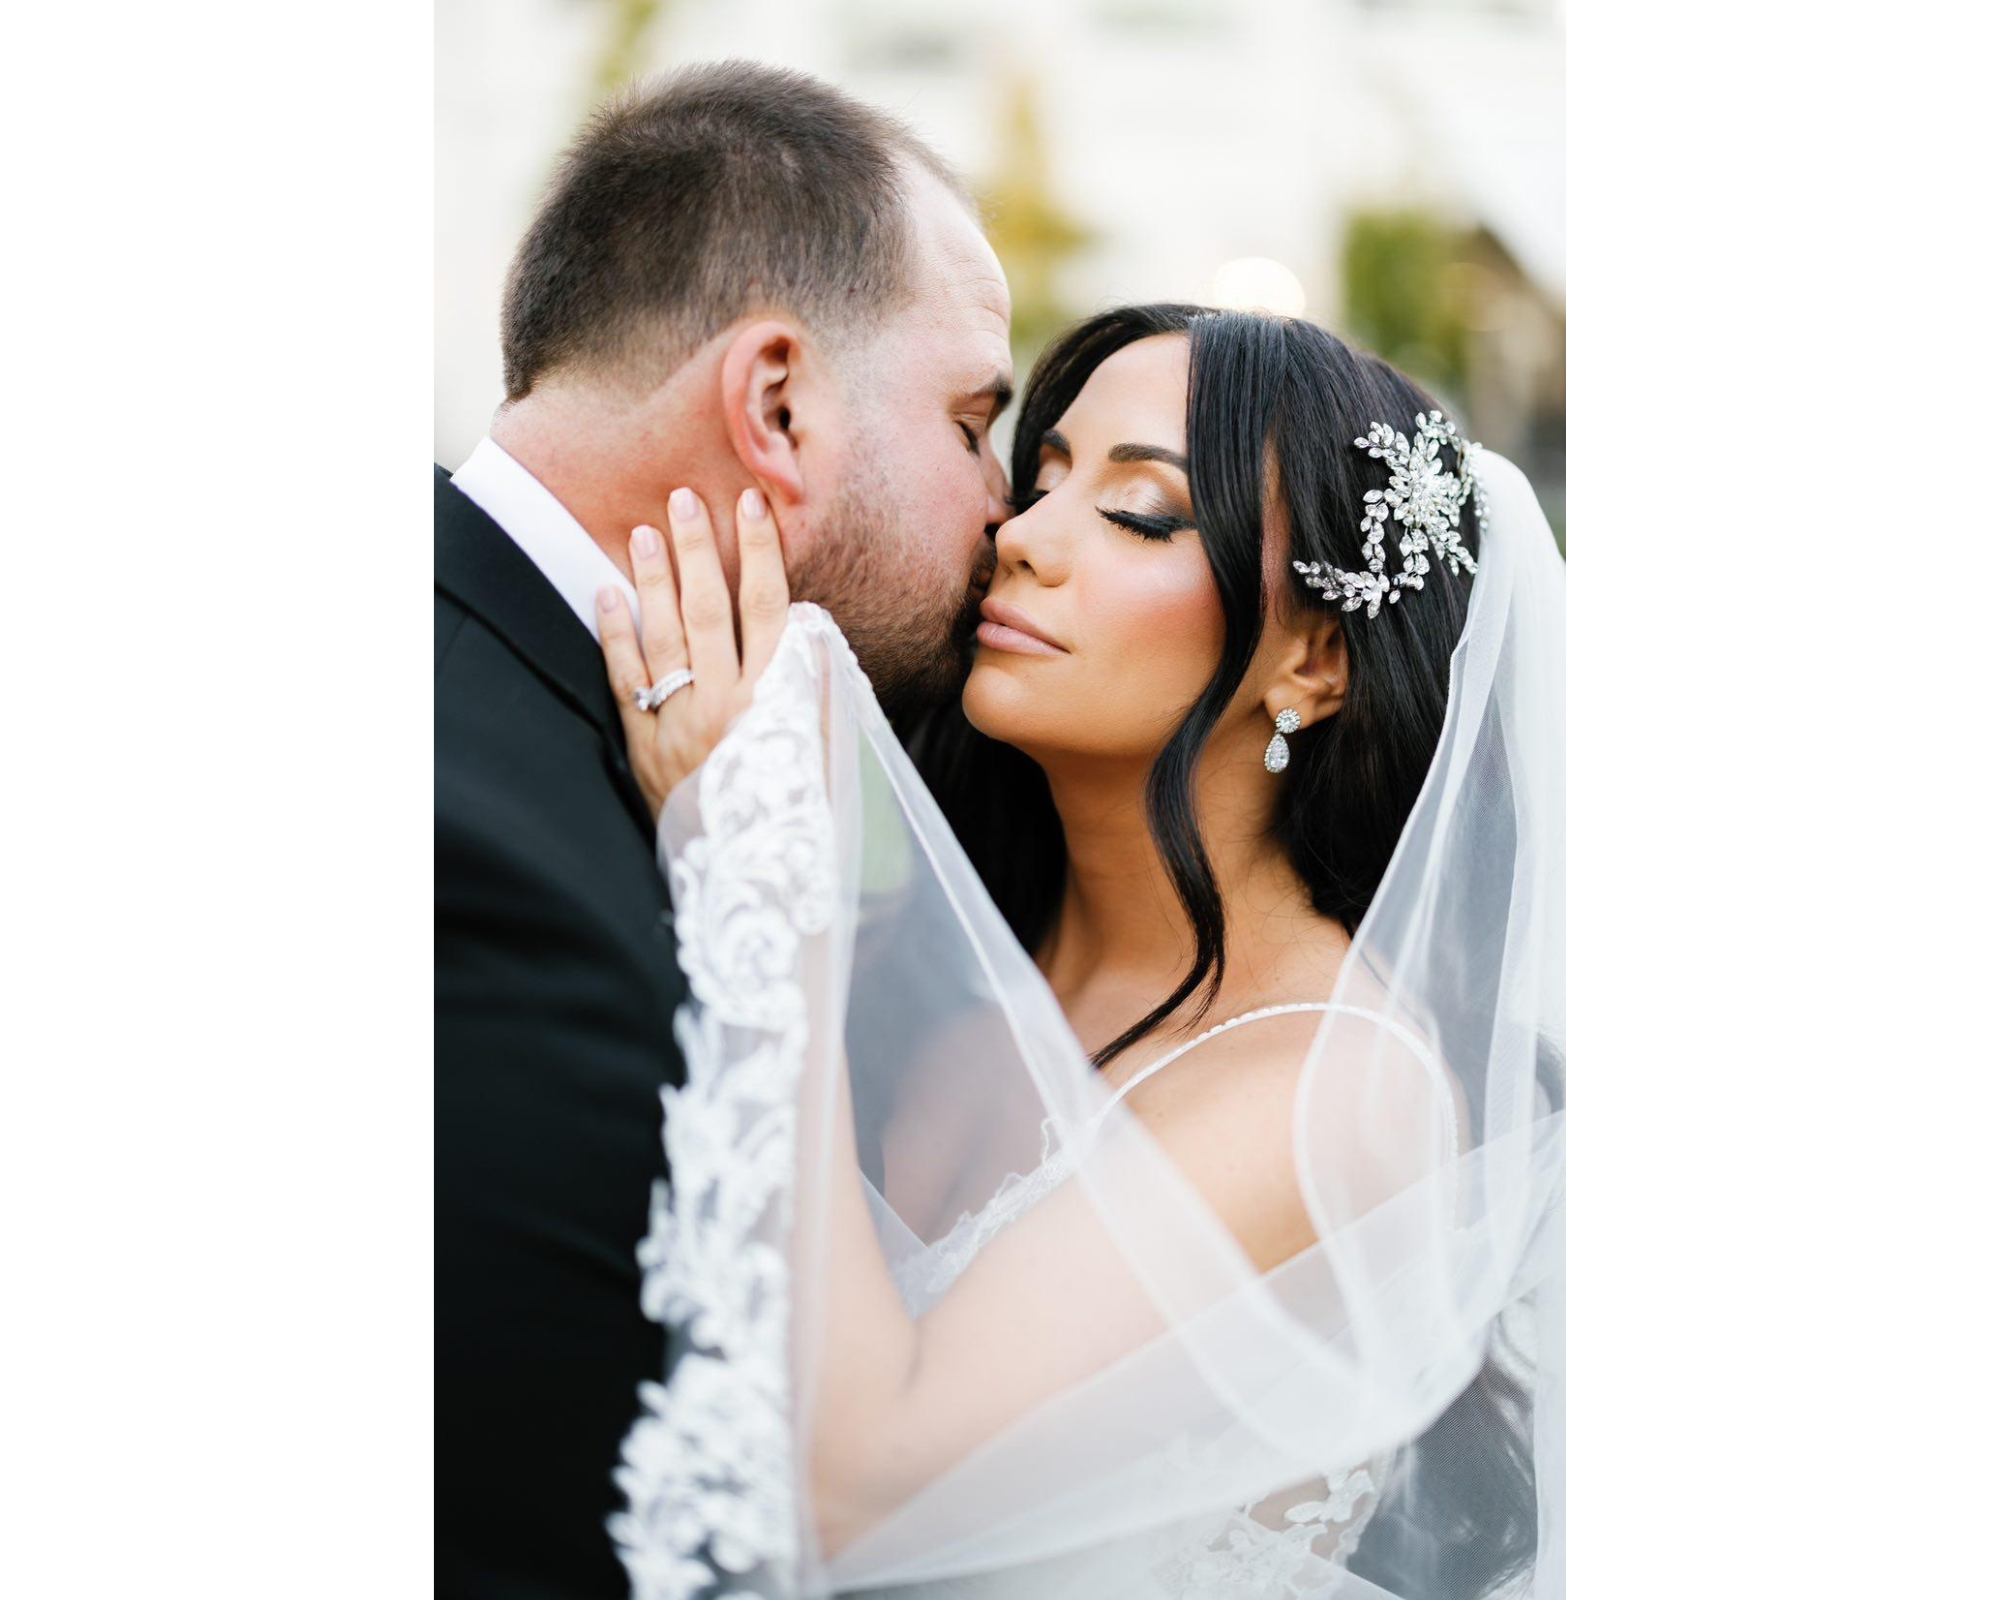 Our beautiful bride and her handsome groom! The bride is wearing a crystal bridal comb and a lace-edged veil.